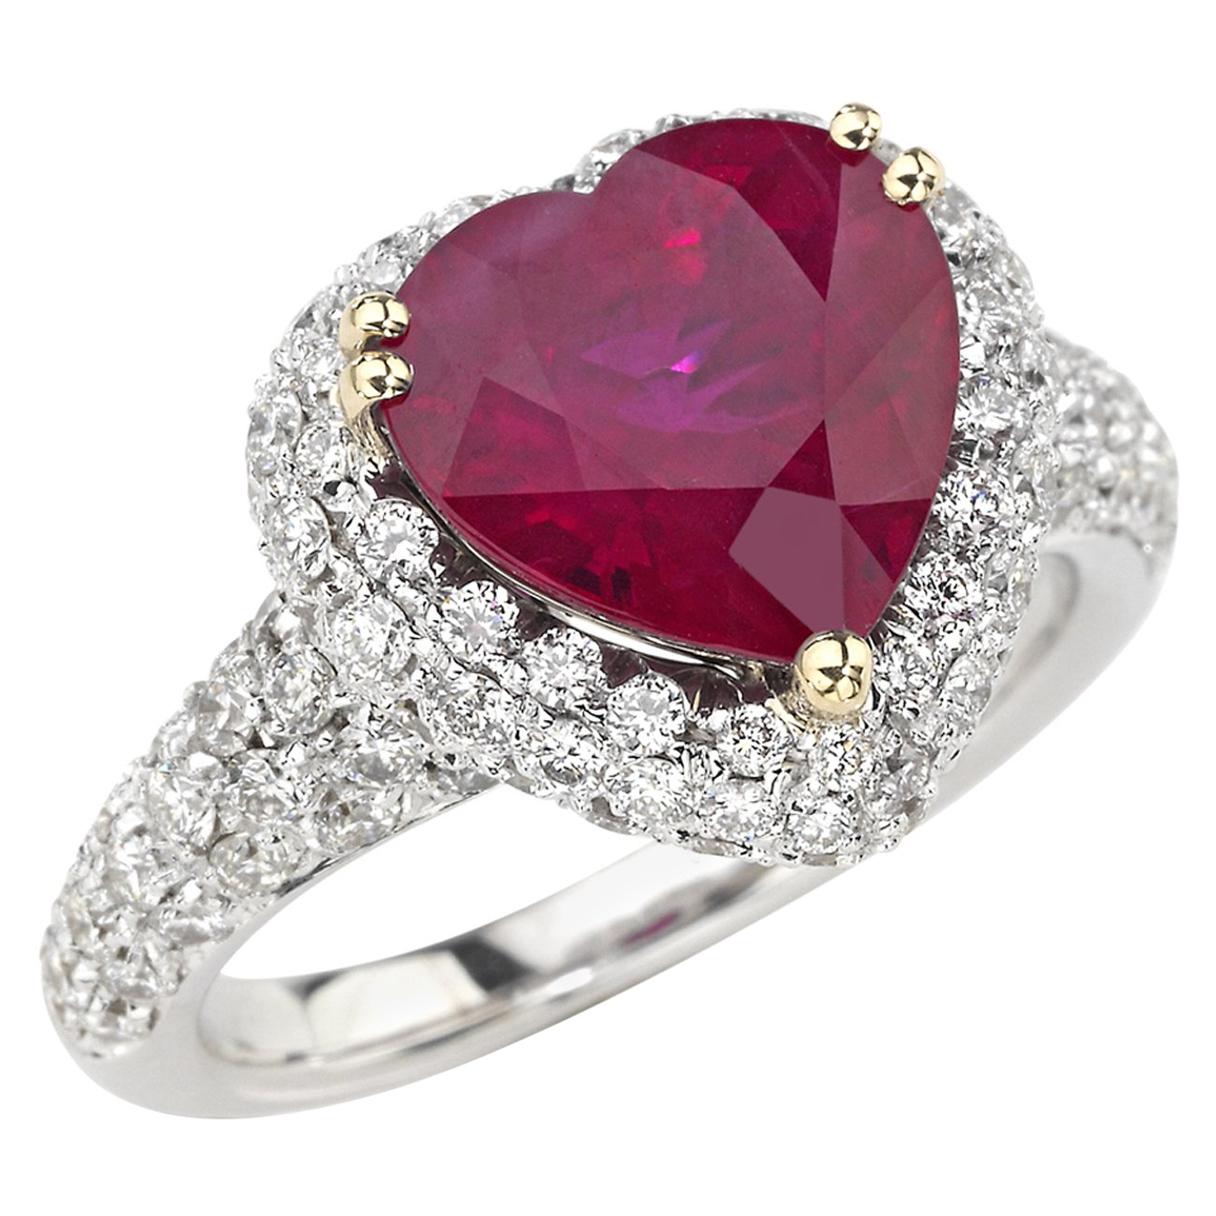 Gem Stone King 1.78 Ct Oval Pink Created Sapphire White Diamond 925 Sterling Silver Mens Ring